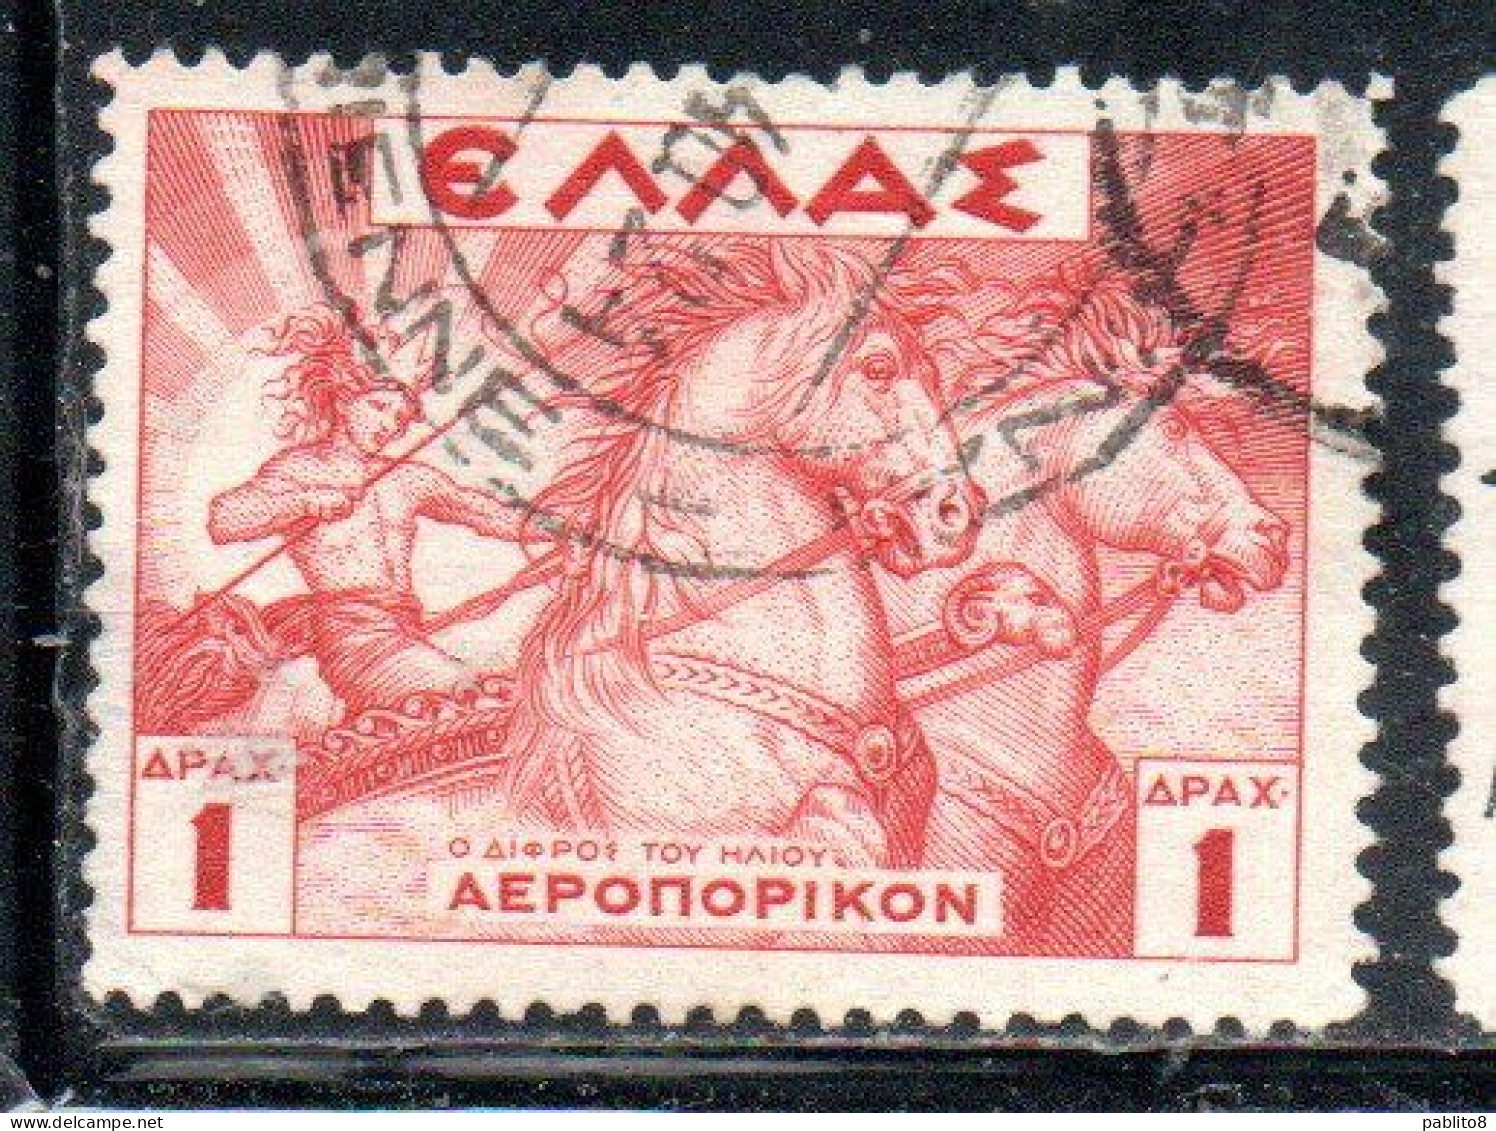 GREECE GRECIA ELLAS 1935 AIR POST MAIL AIRMAIL MYTHOLOGICAL HELIOS DRIVING THE SUN CHARIOT 1d USED USATO OBLITERE' - Gebraucht